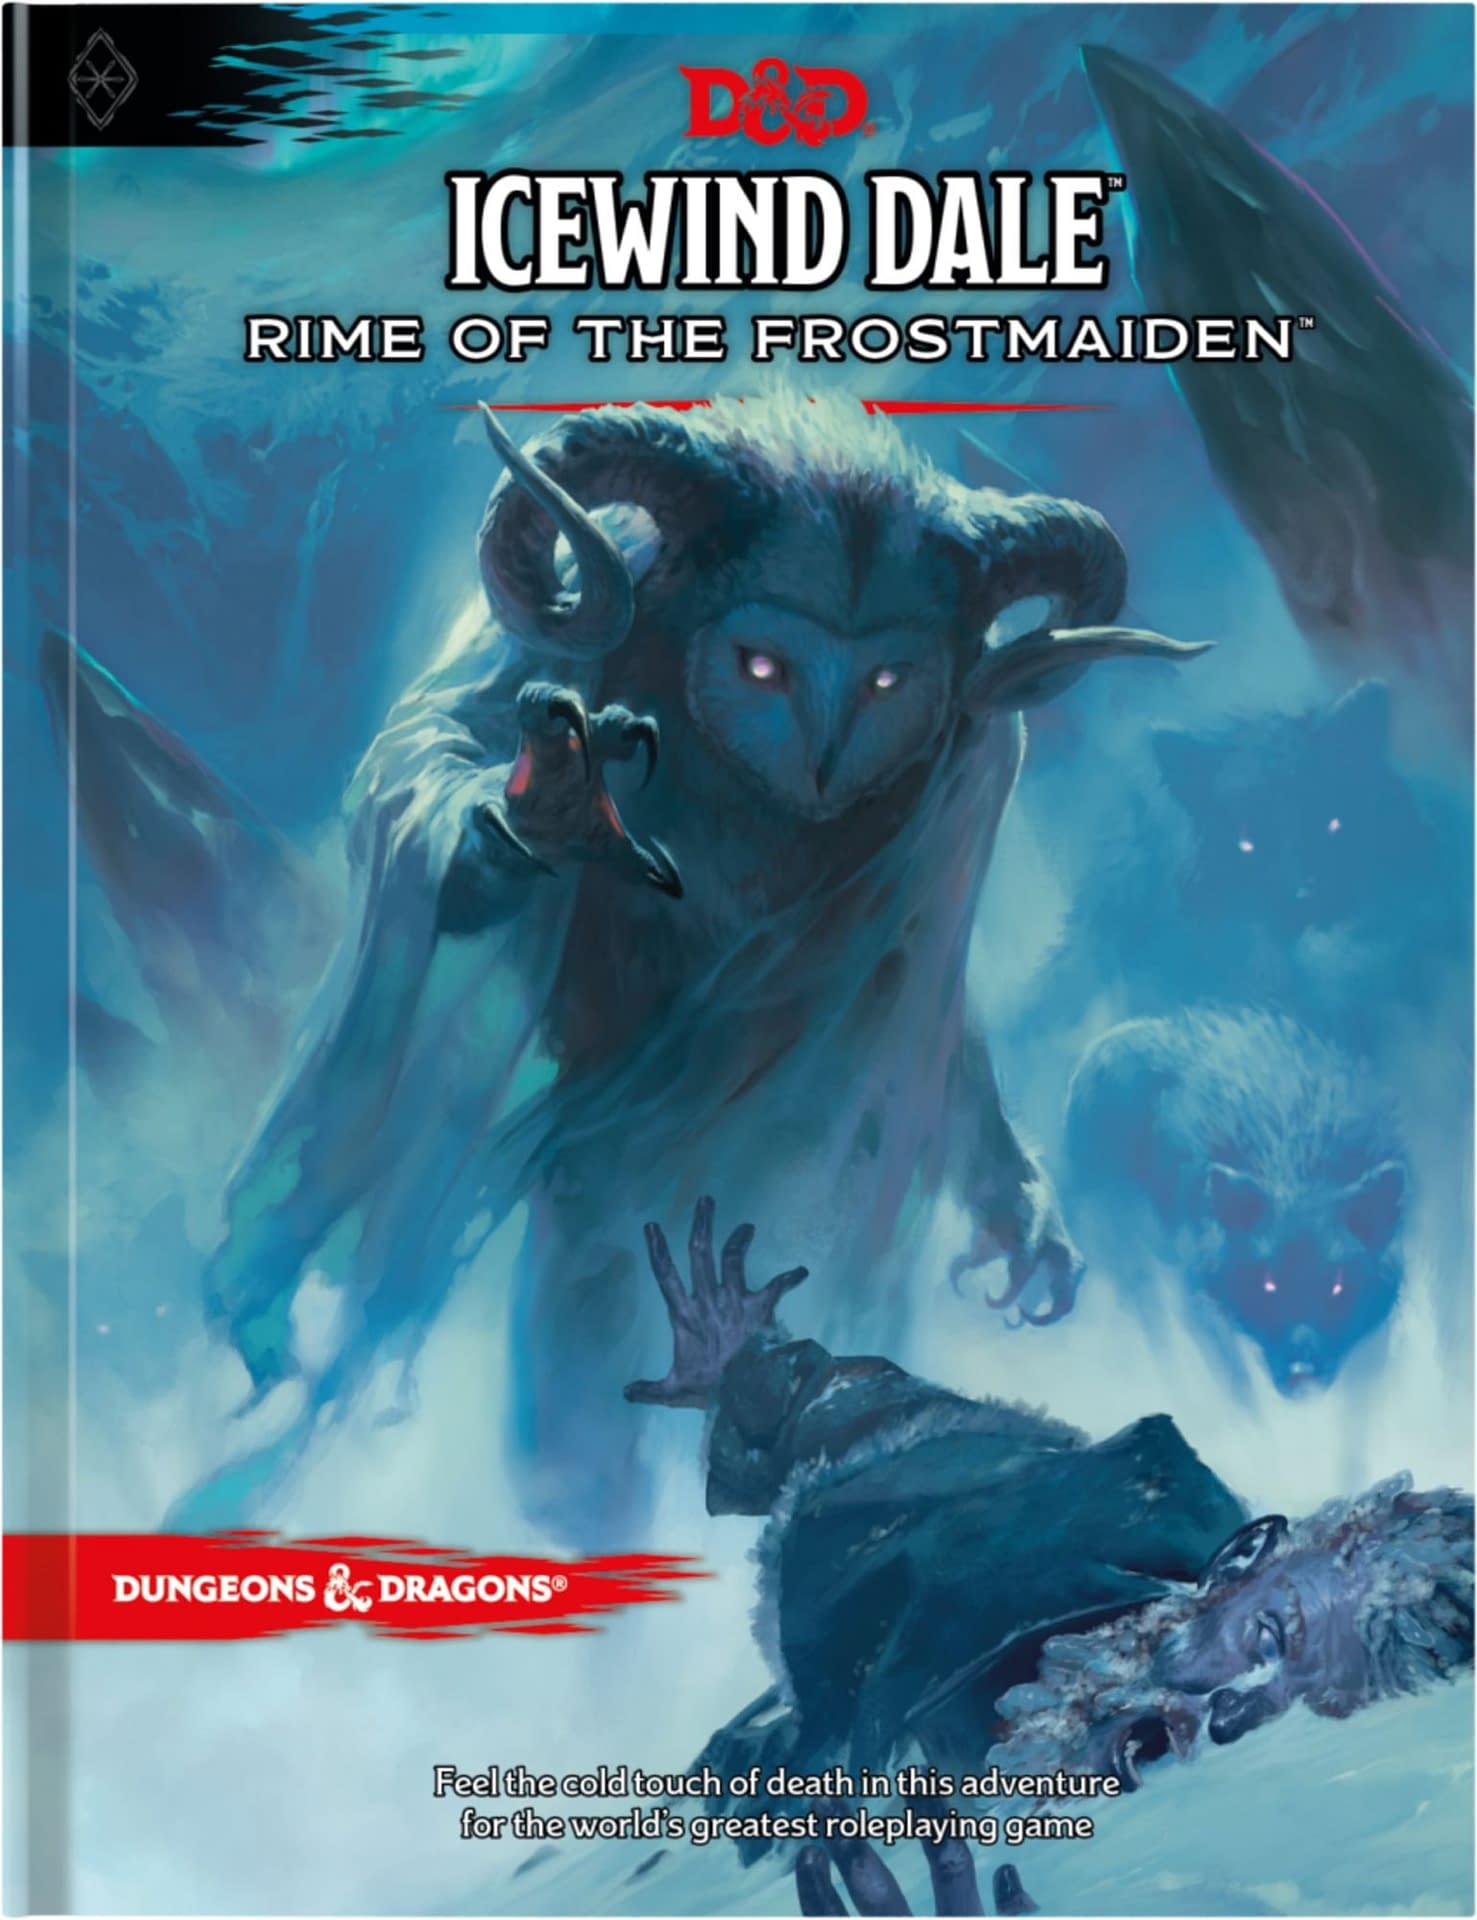 D&D Reveals Next Book Icewind Dale Rime Of The Frostmaiden